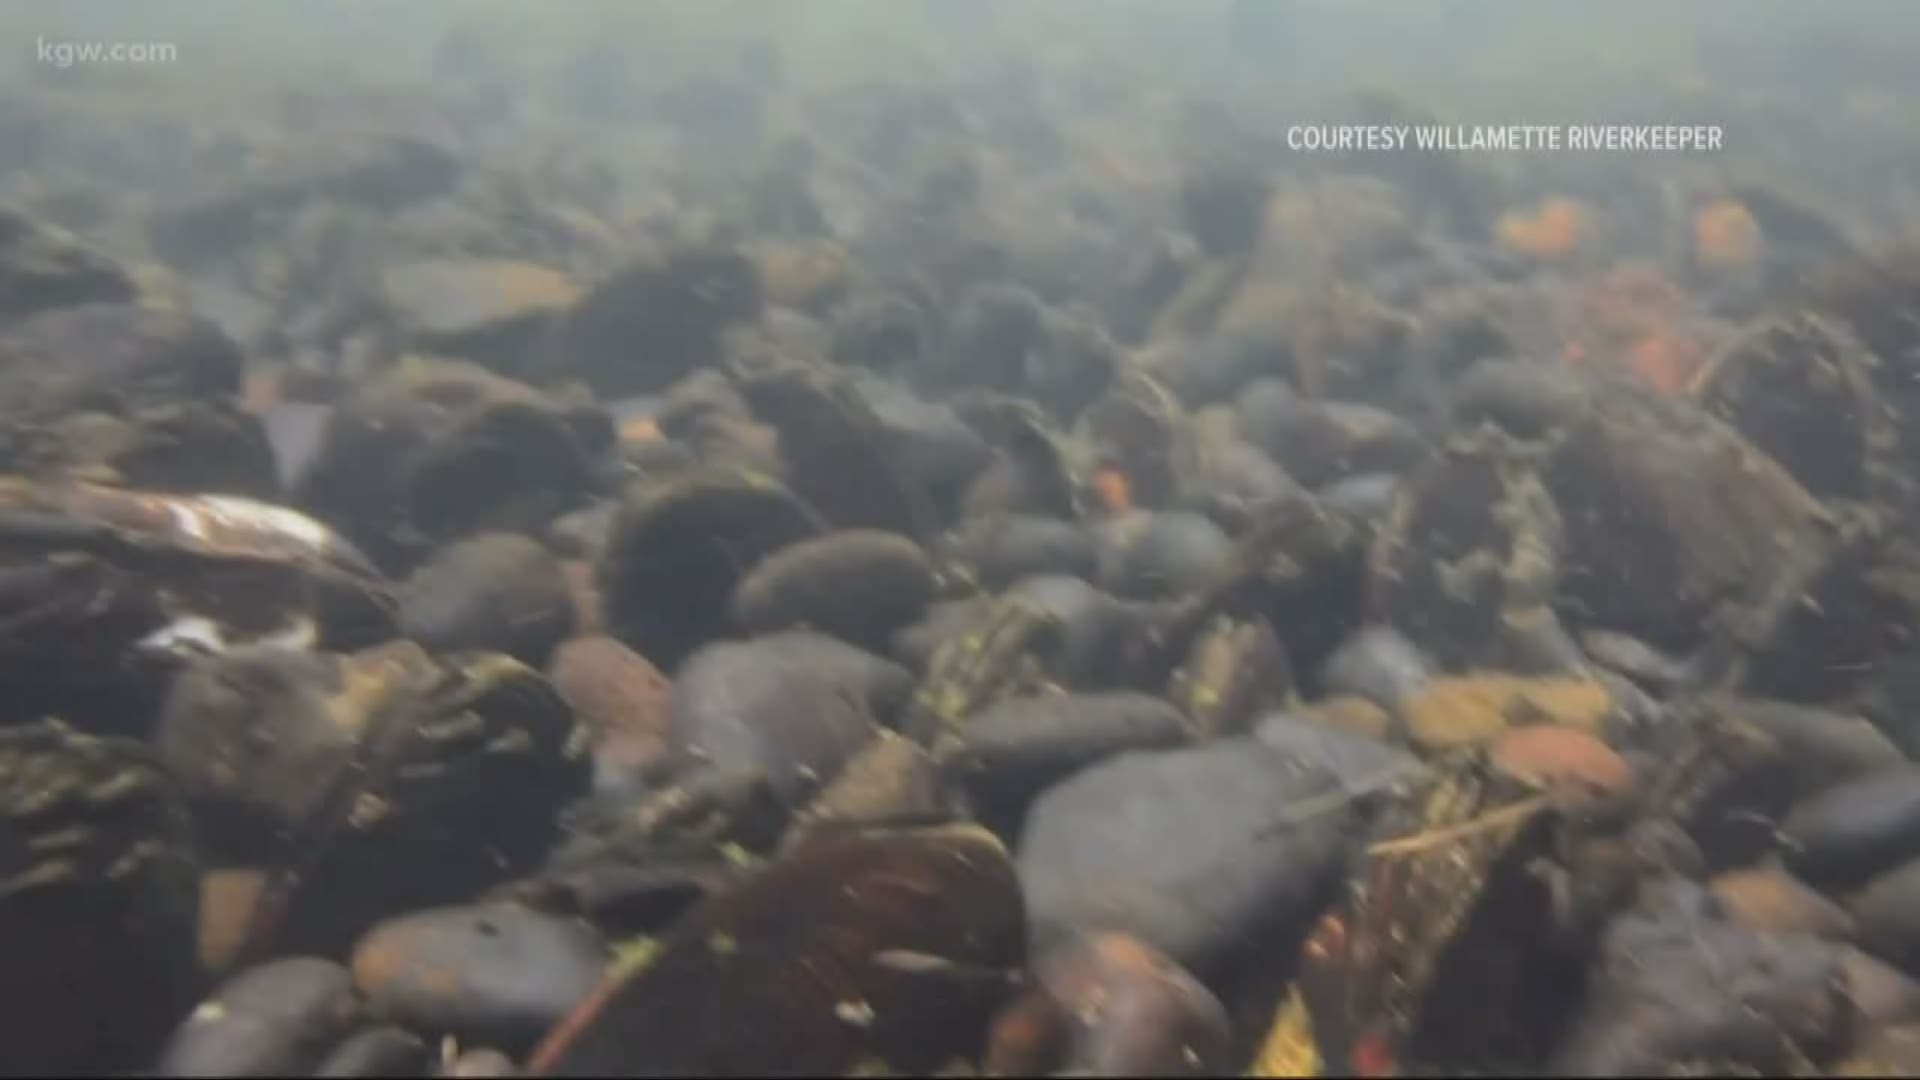 Mussels are rebounding in the Willamette River.